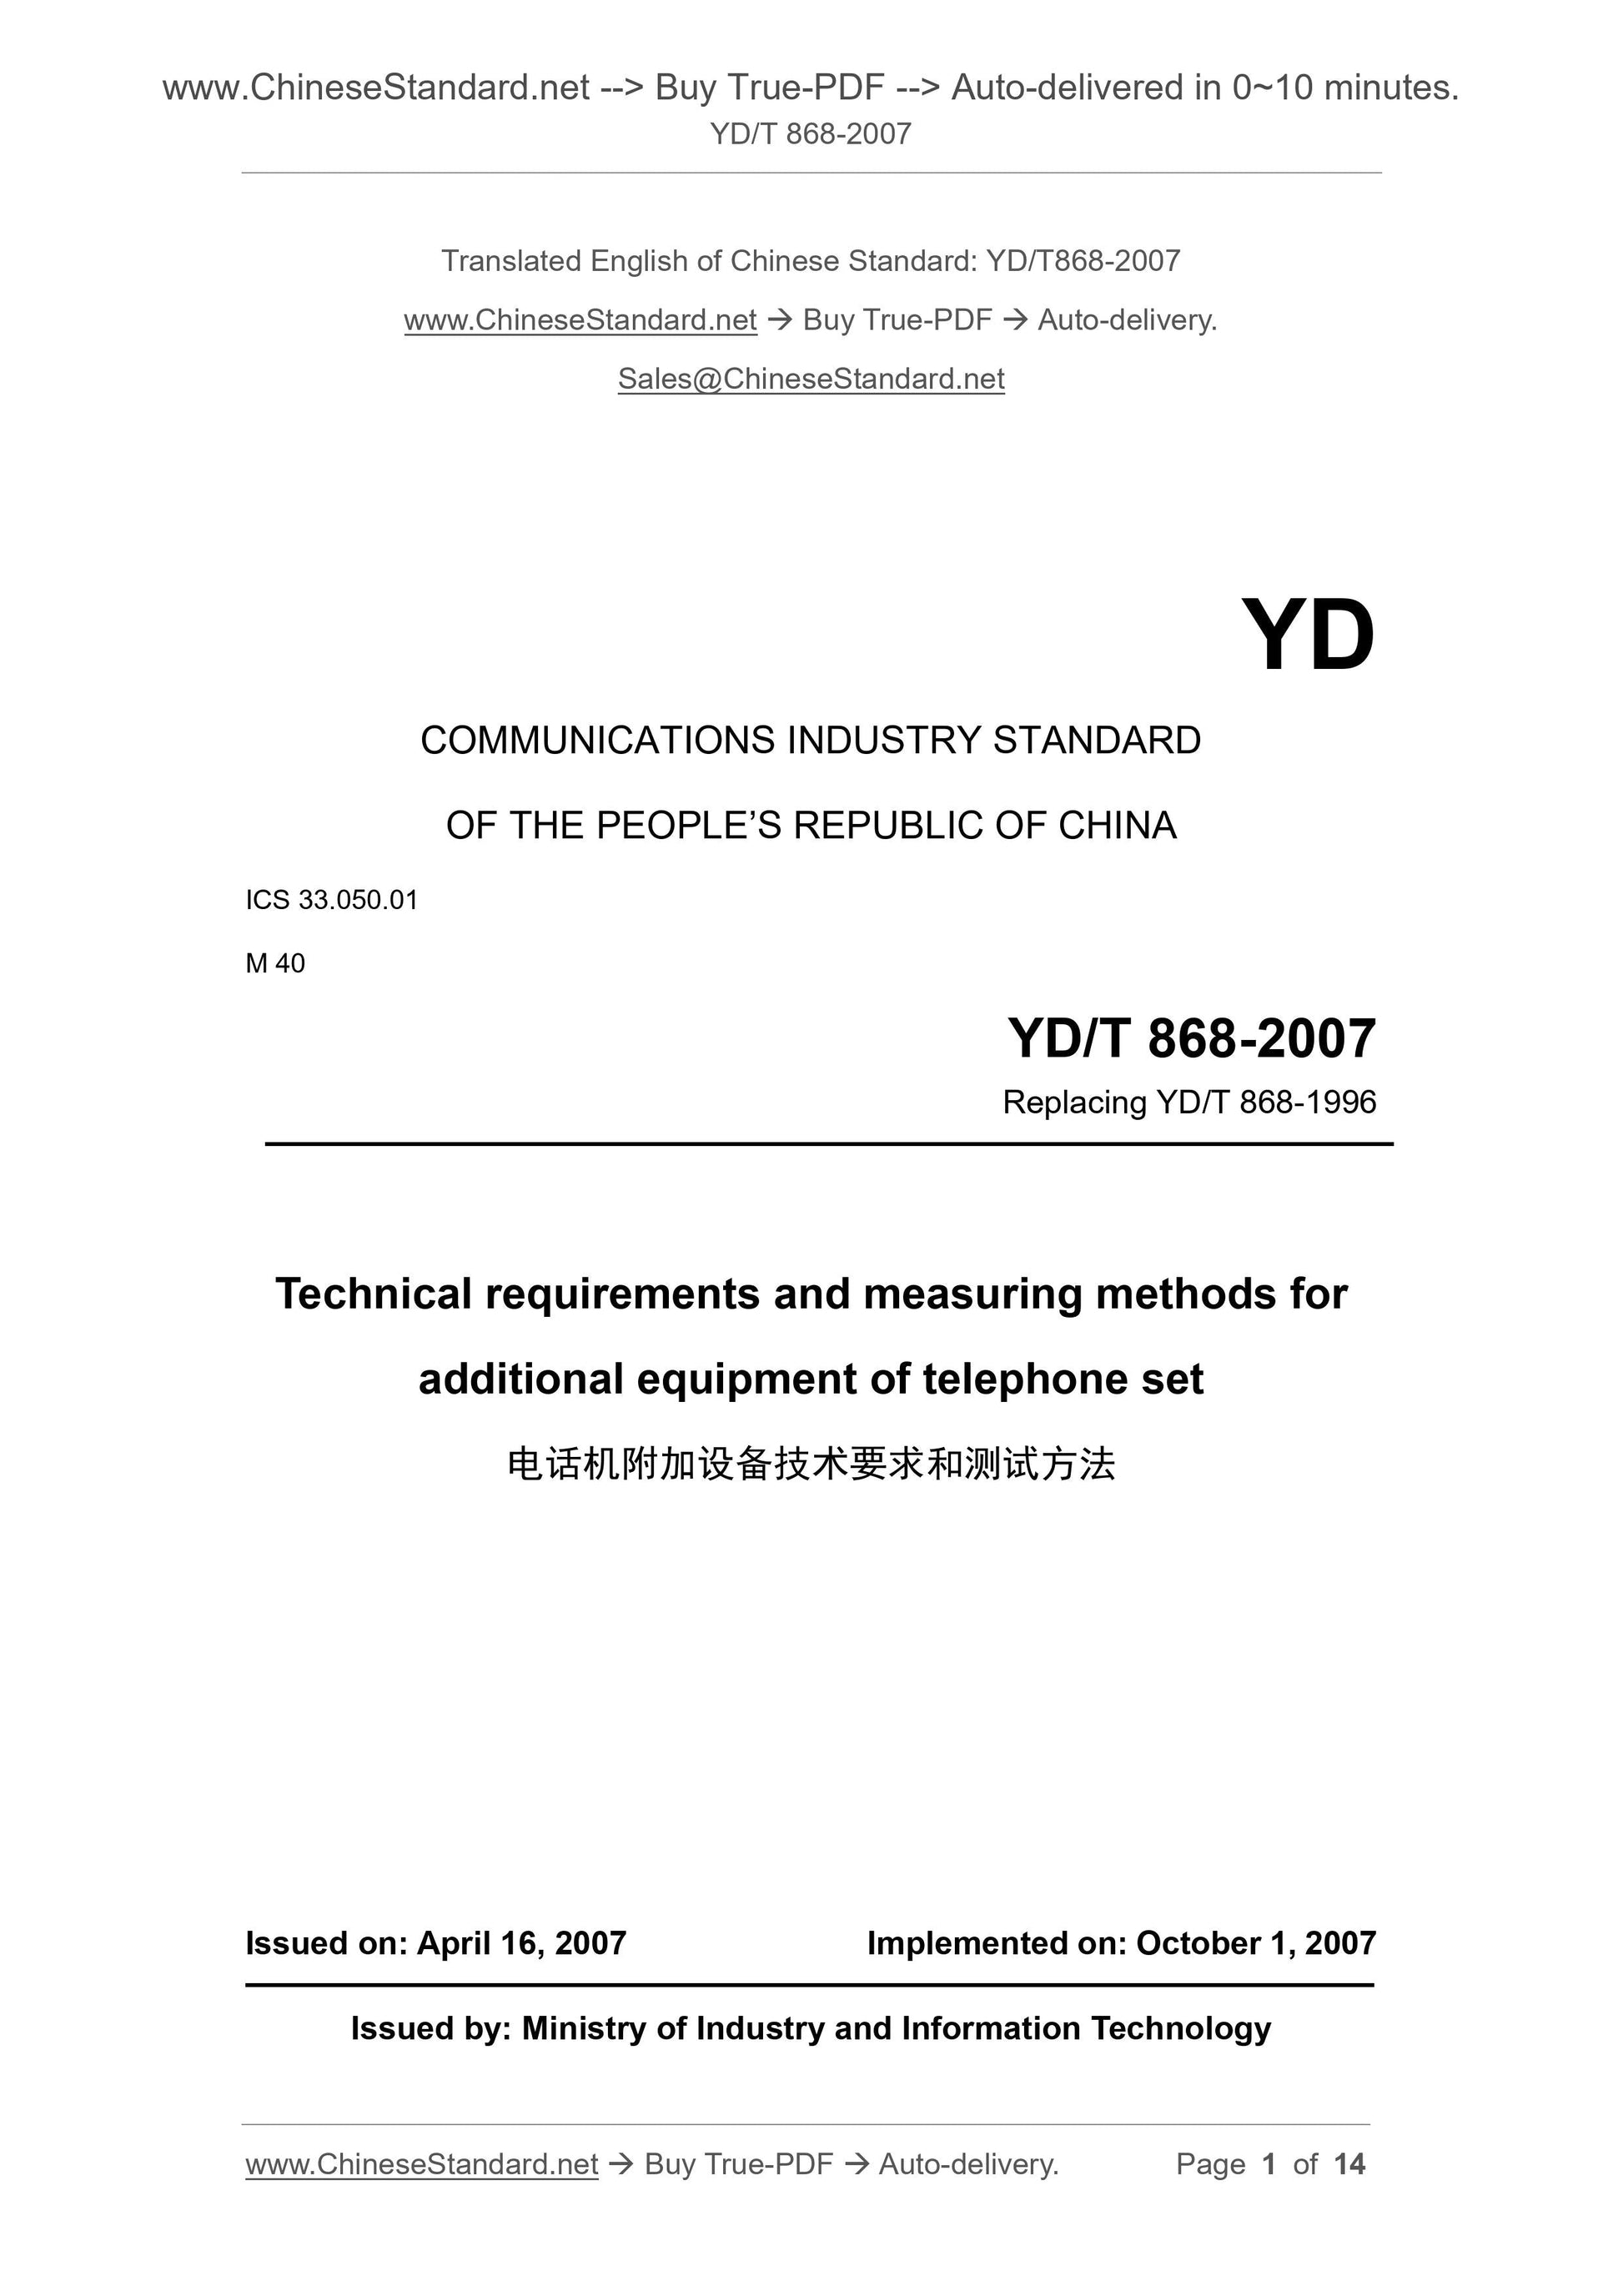 YD/T 868-2007 Page 1